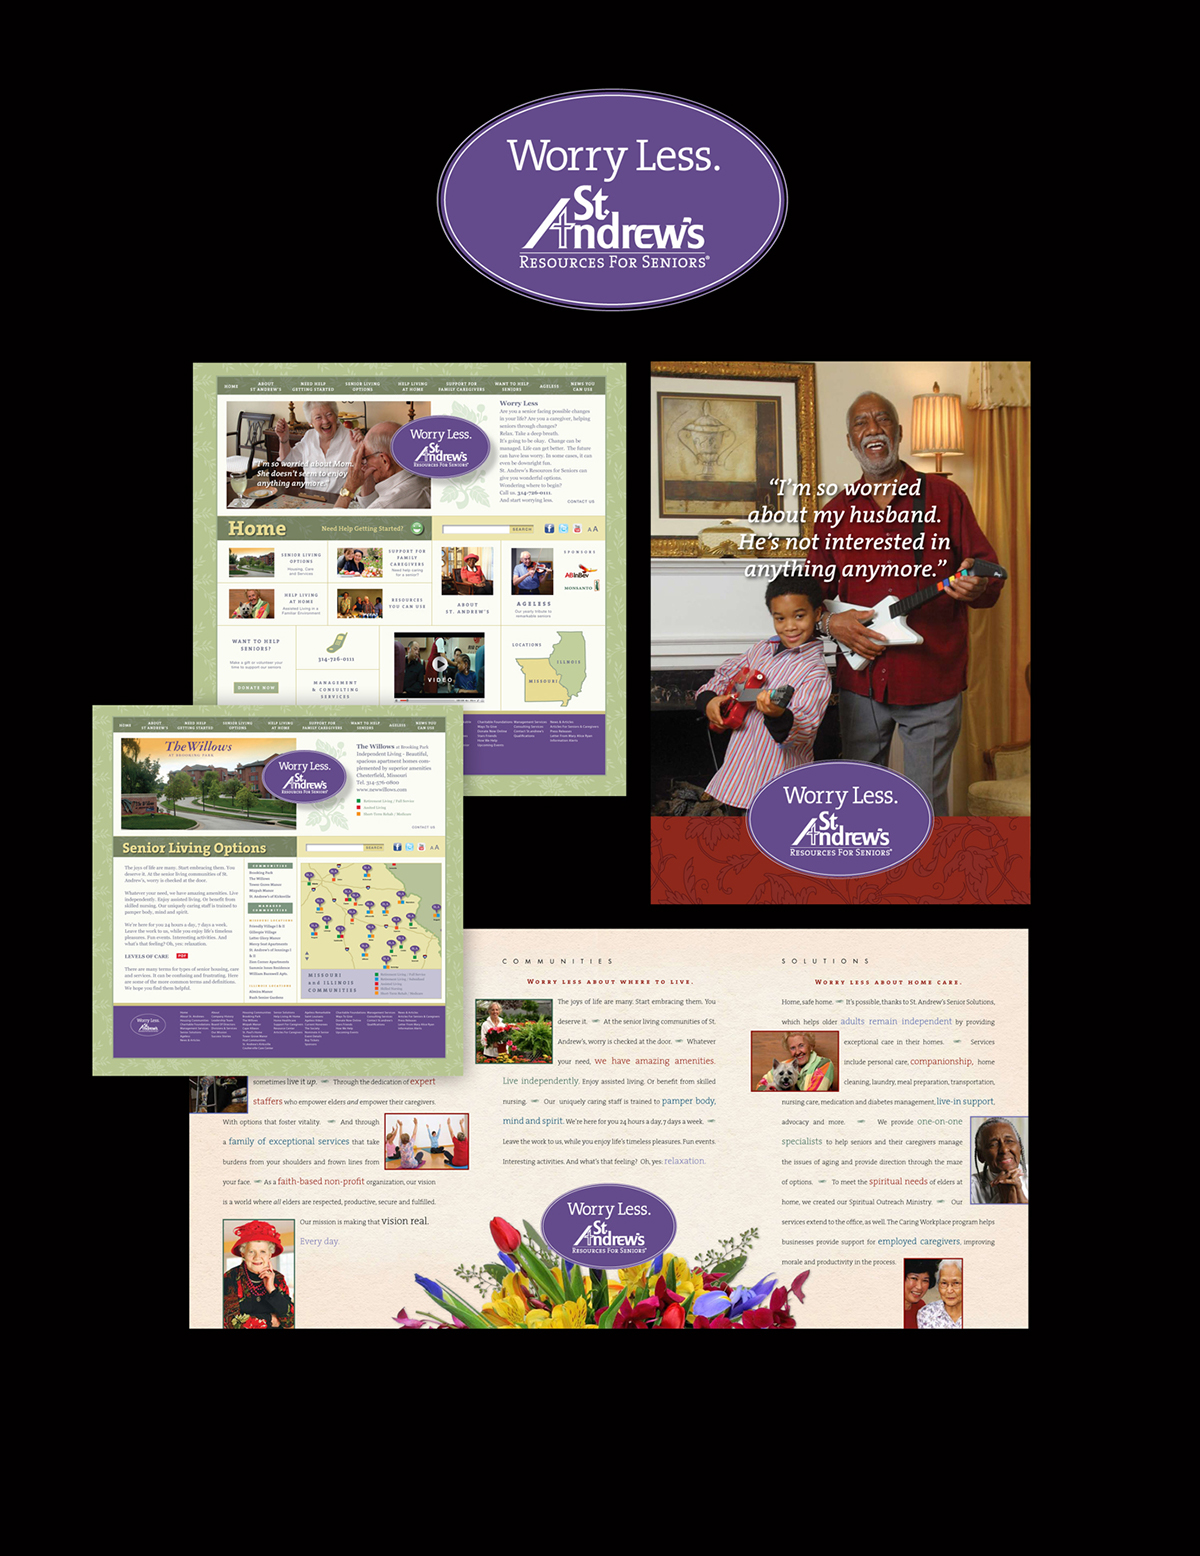 St. Andrew's Worry Assisted Living Campaign nursing home st. louis